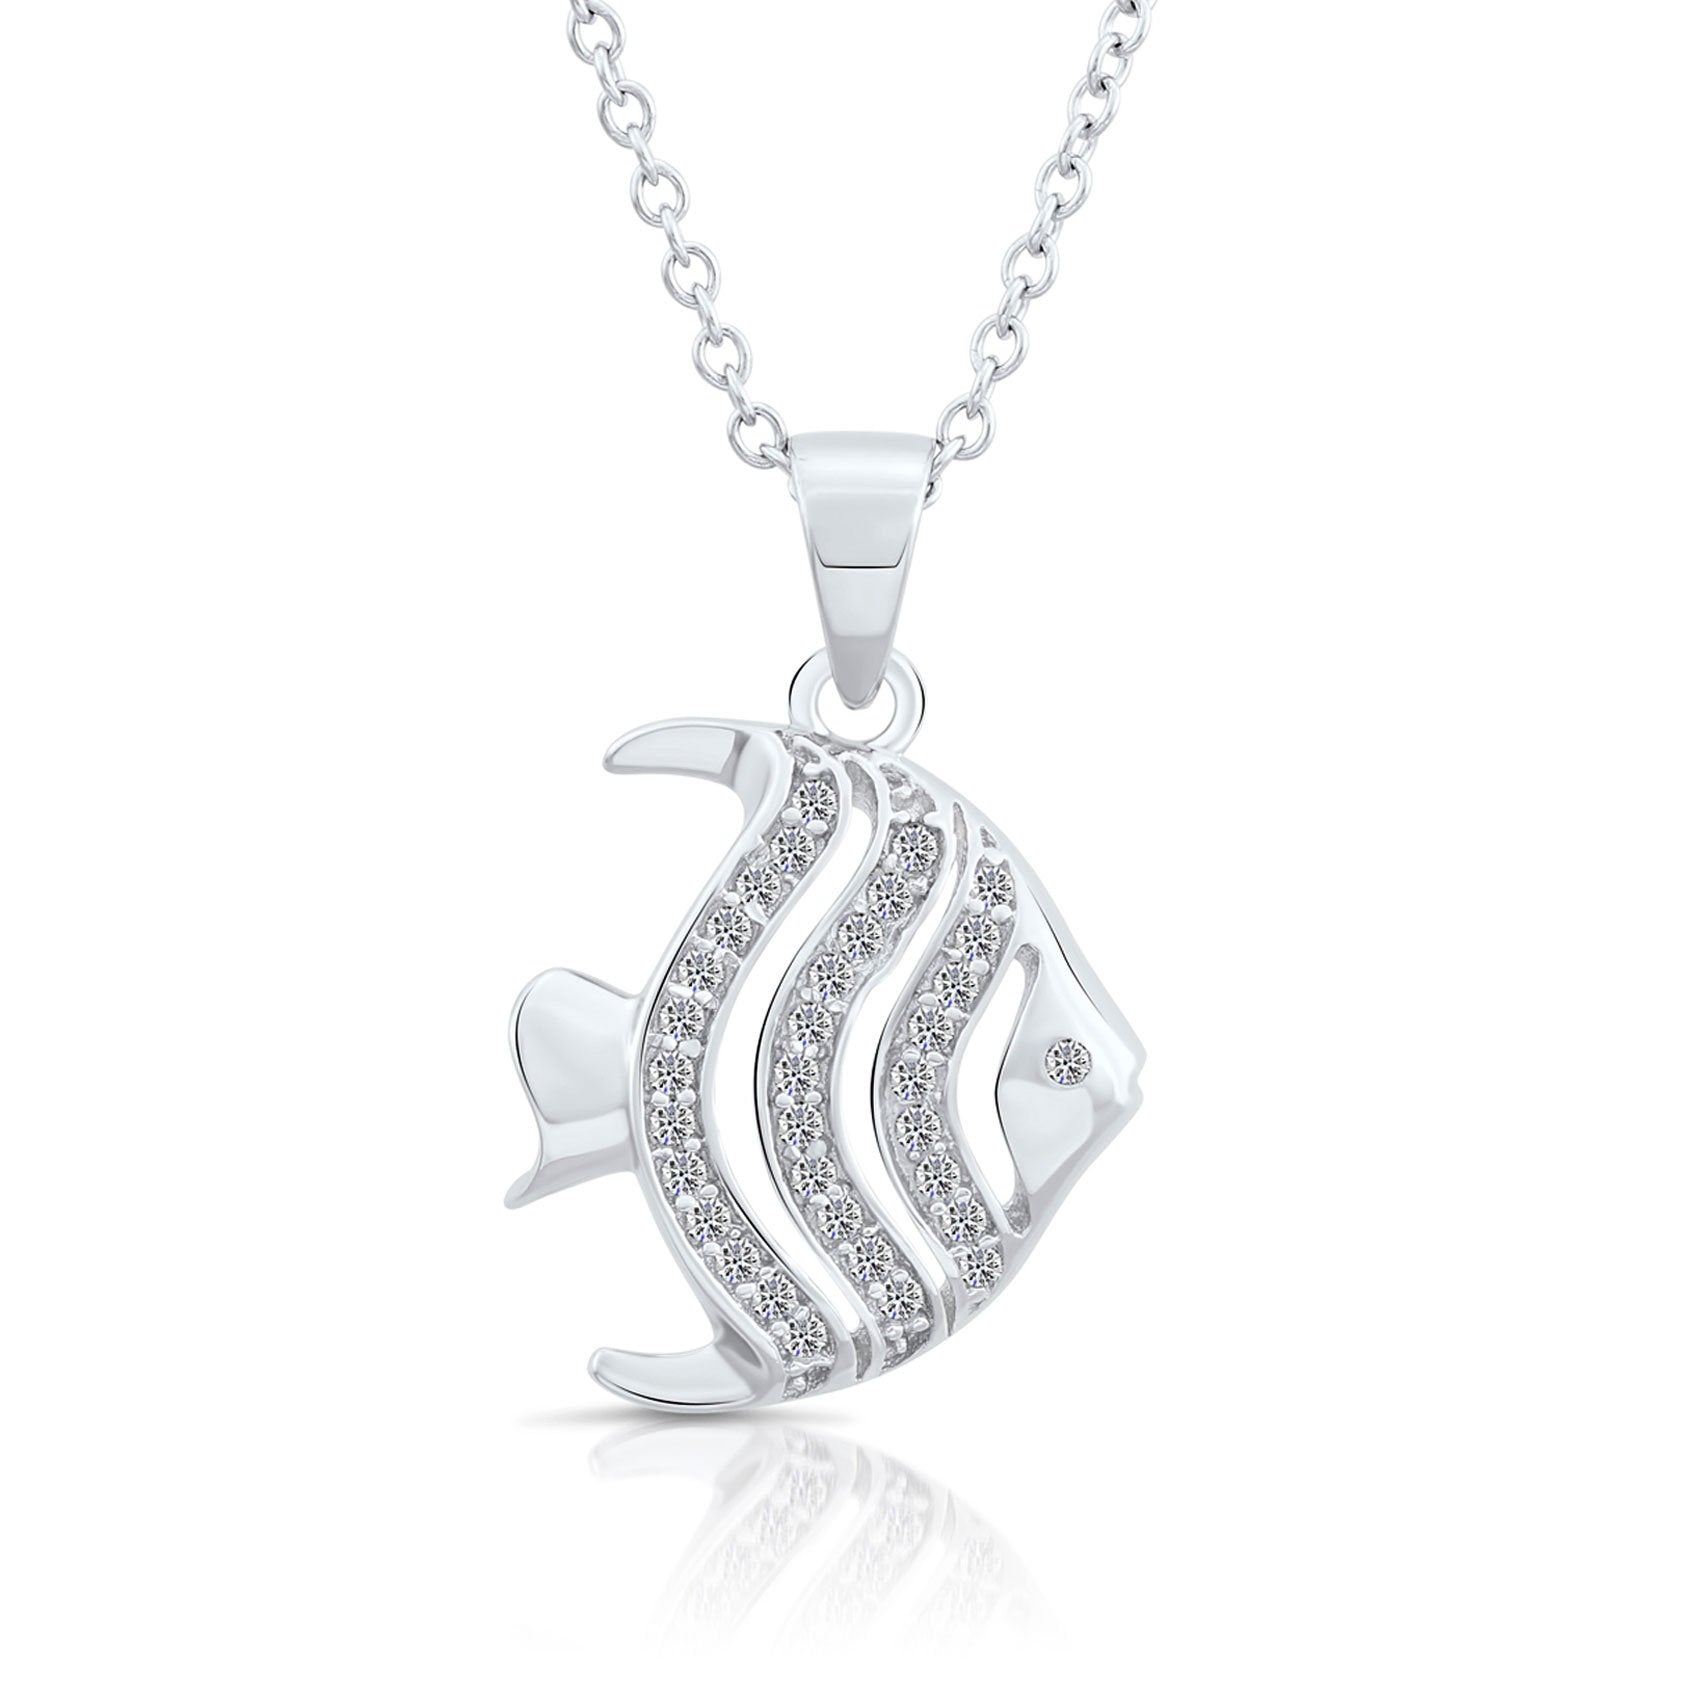 Sterling Silver Angelfish Charm Necklace